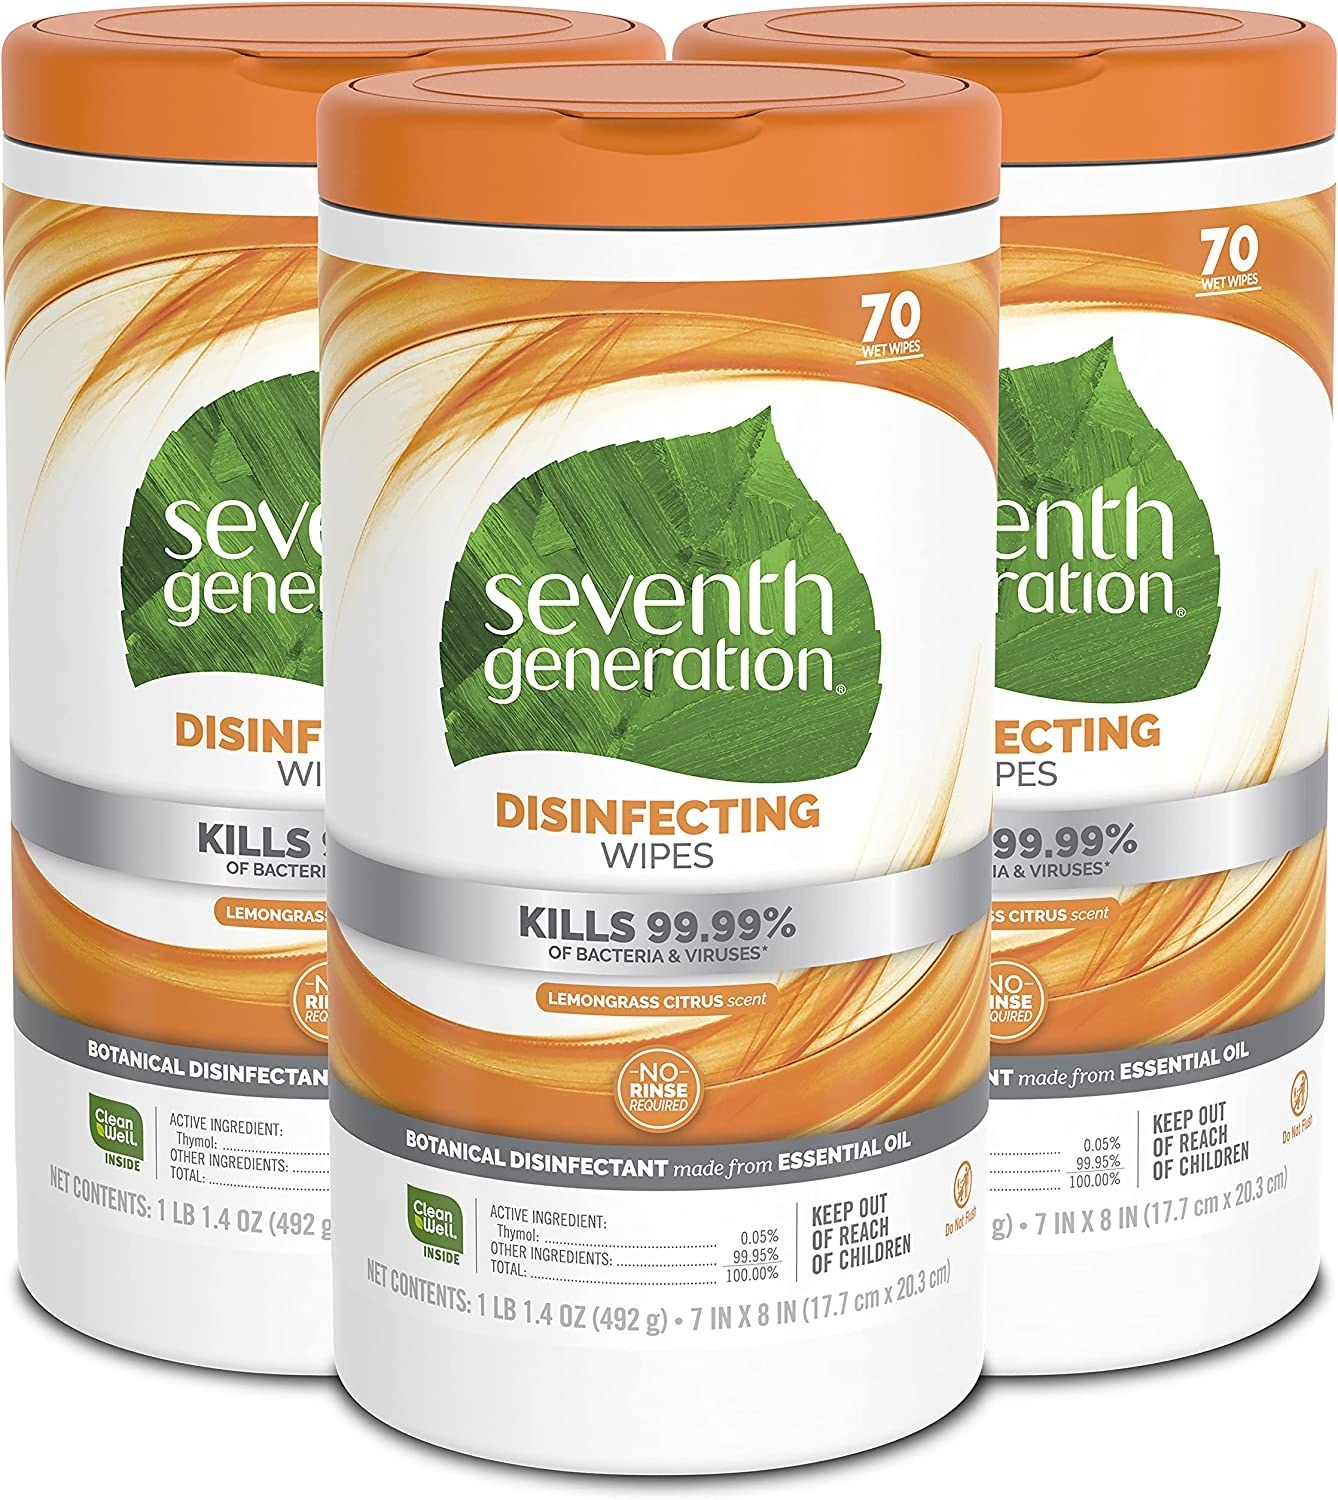 three canisters of Seventh Generation disinfecting wipes